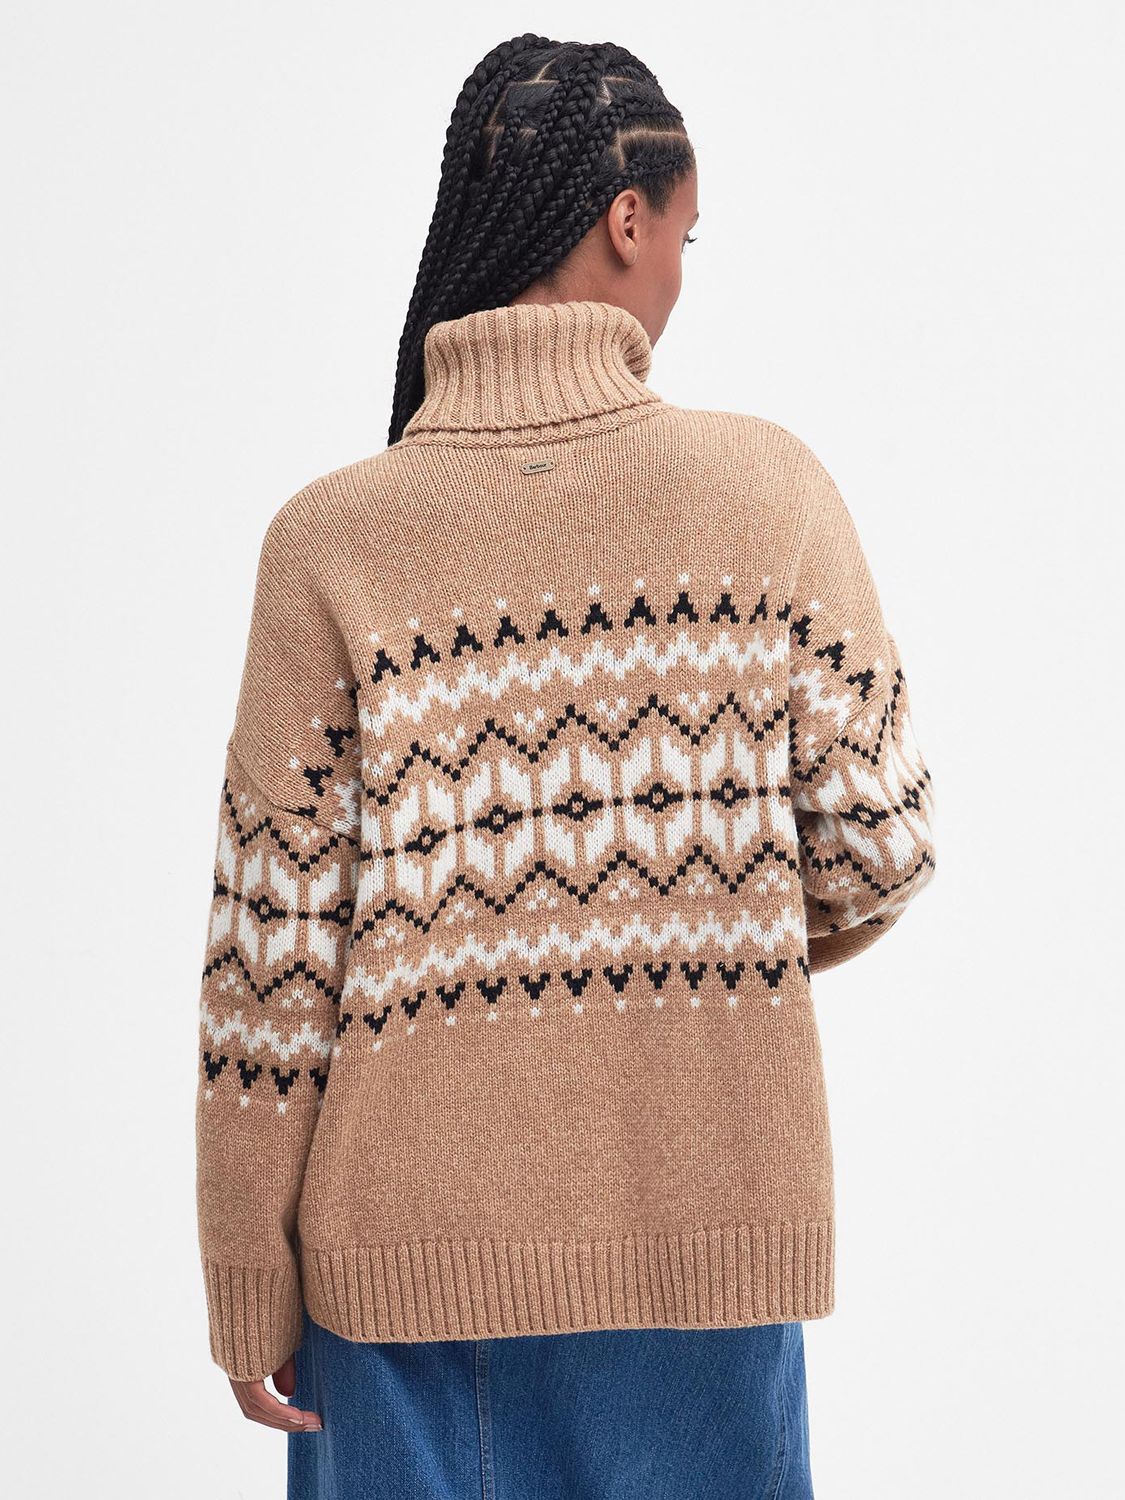 Buy Barbour Tomorrow's Archive Blaire Fair Isle Wool Blend Jumper, Hessian Online at johnlewis.com